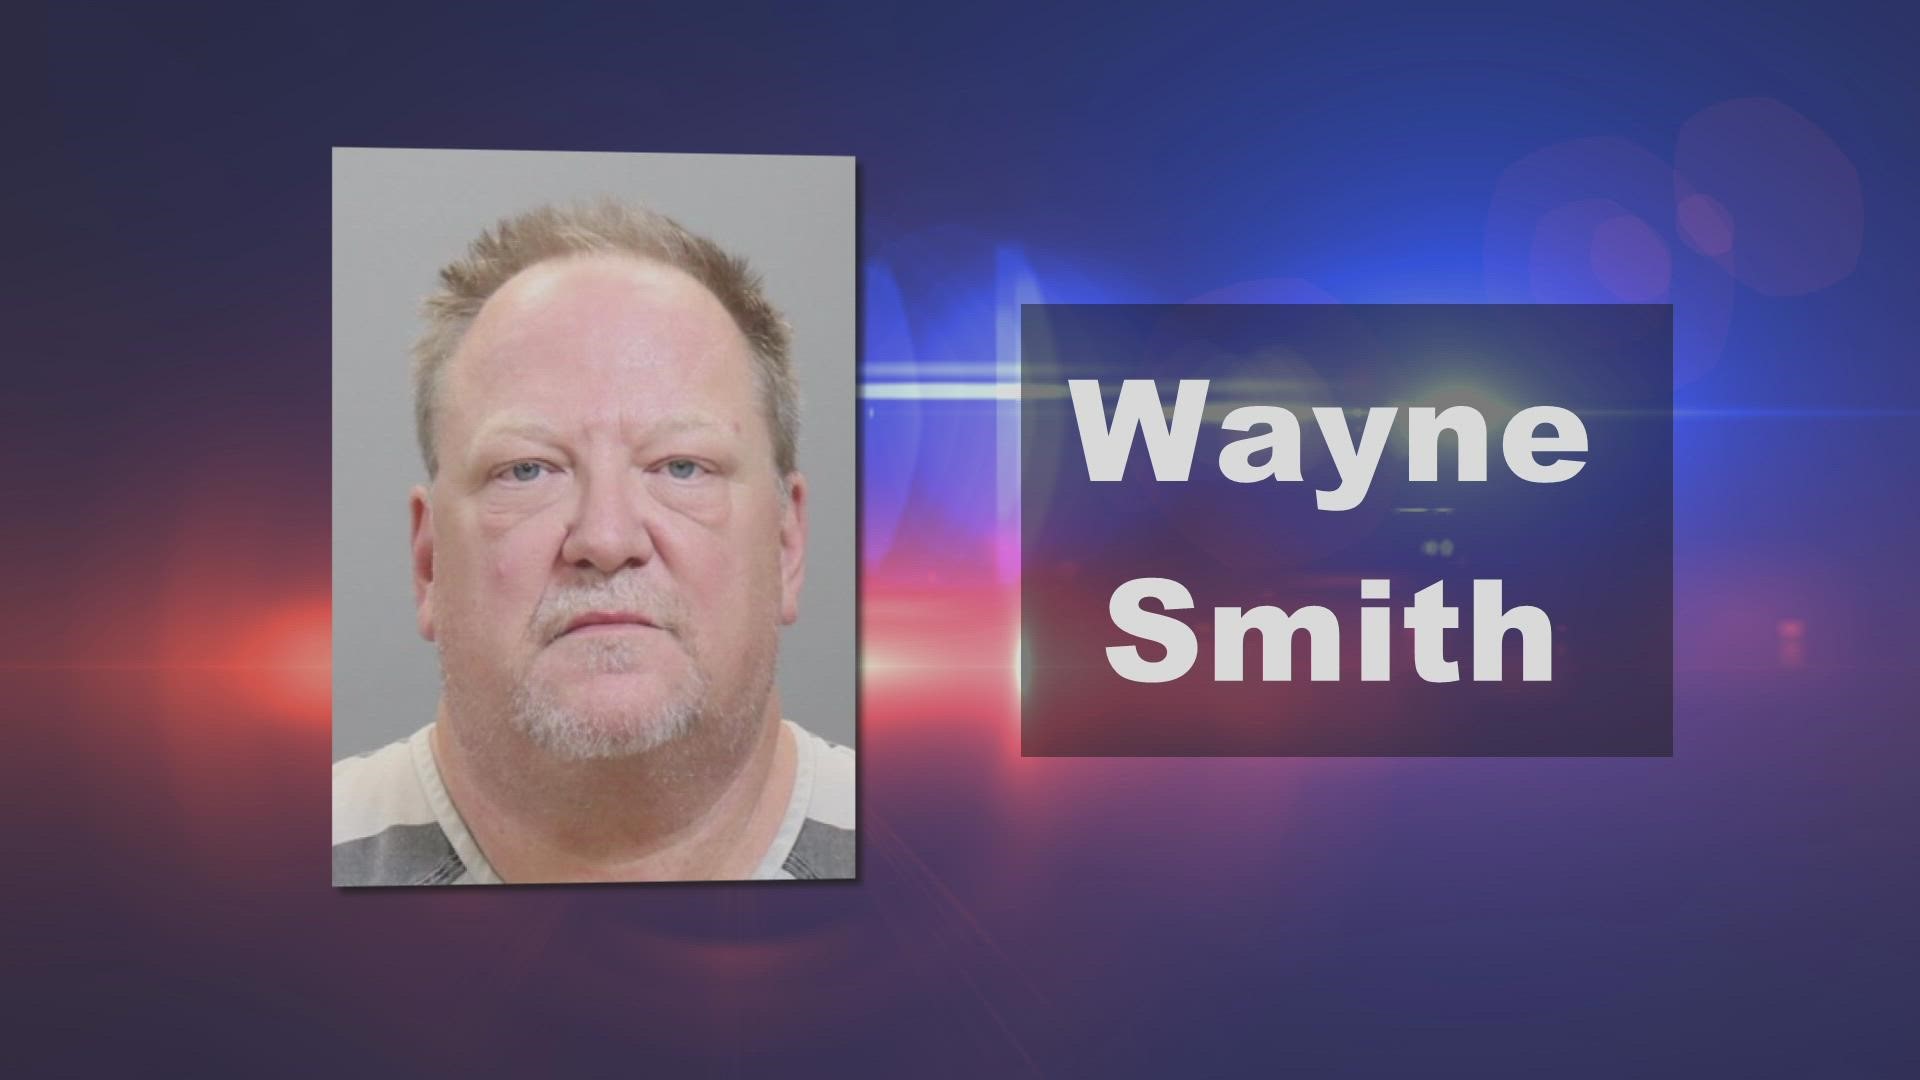 Prosecutors said Wayne Smith, 57, was convicted of raping a child, statutory rape by an authority figure and sexual battery.